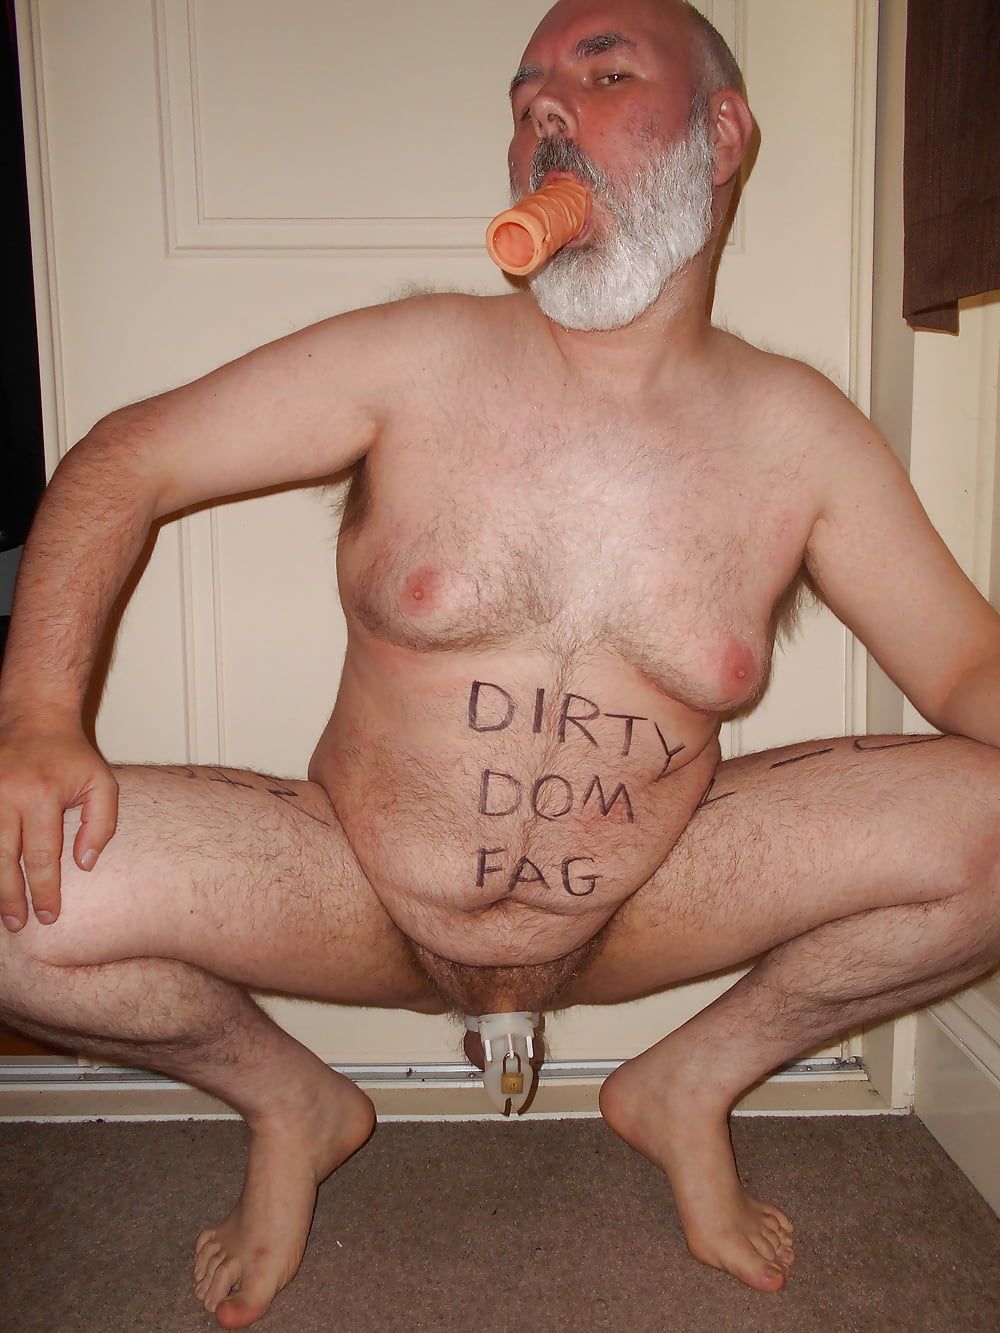 Dirty dom nudes